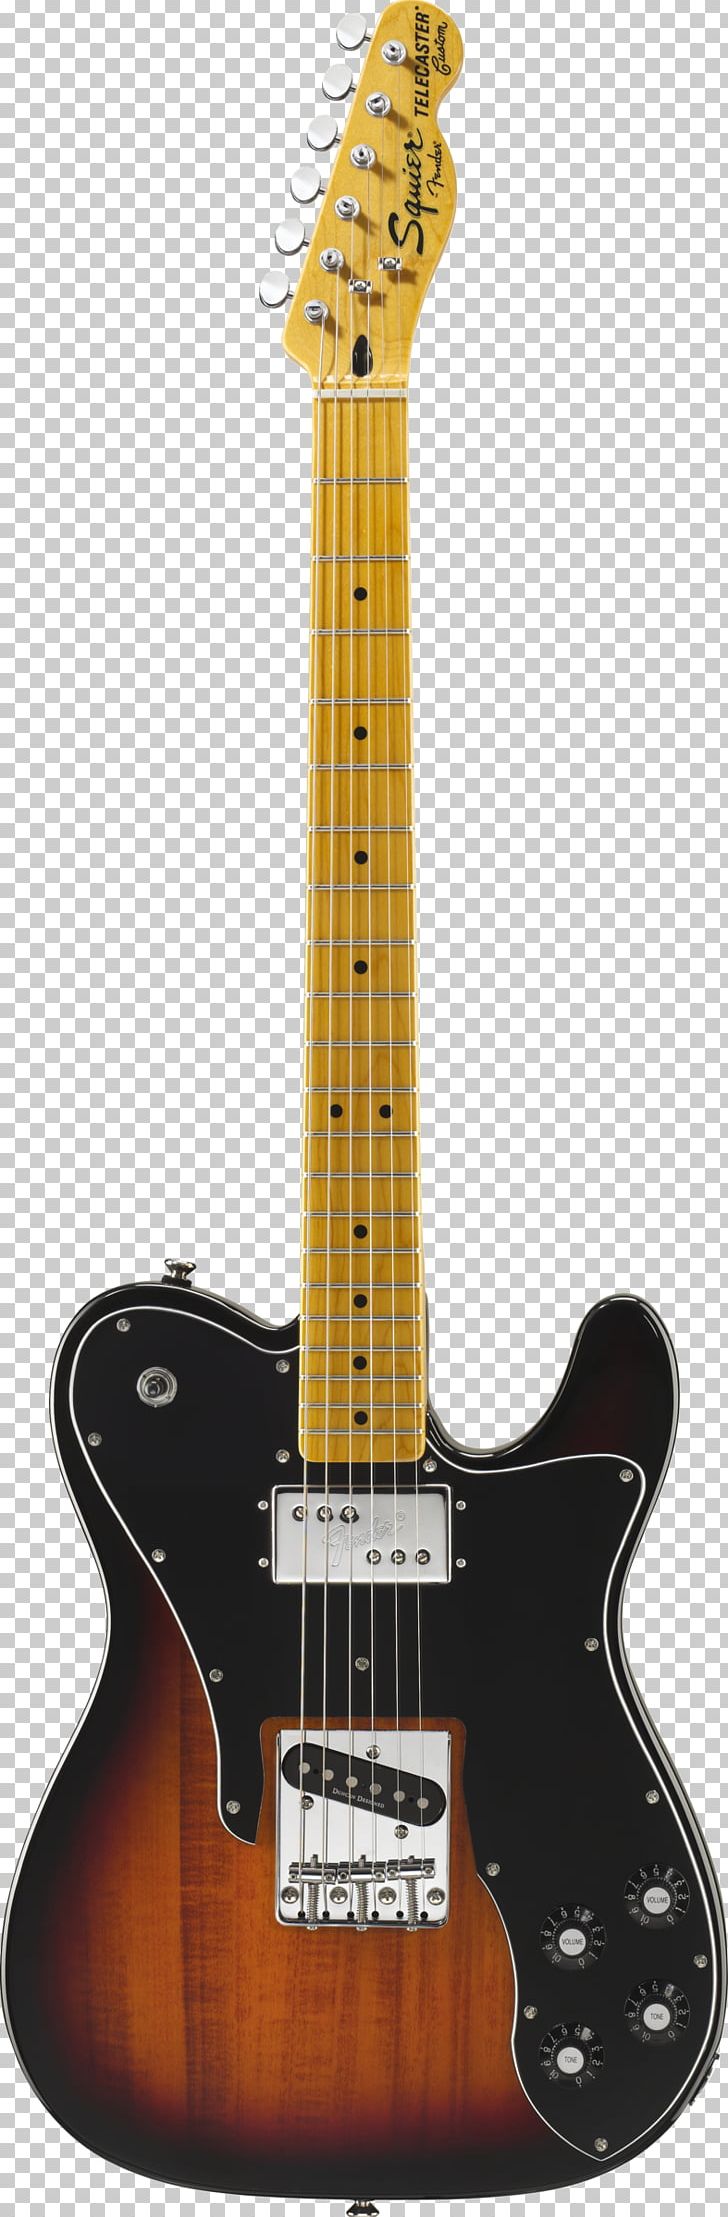 Fender Telecaster Custom Fender Stratocaster Squier Telecaster PNG, Clipart, Guitar Accessory, Musical Instrument, Objects, Plucked String Instruments, Slide Guitar Free PNG Download